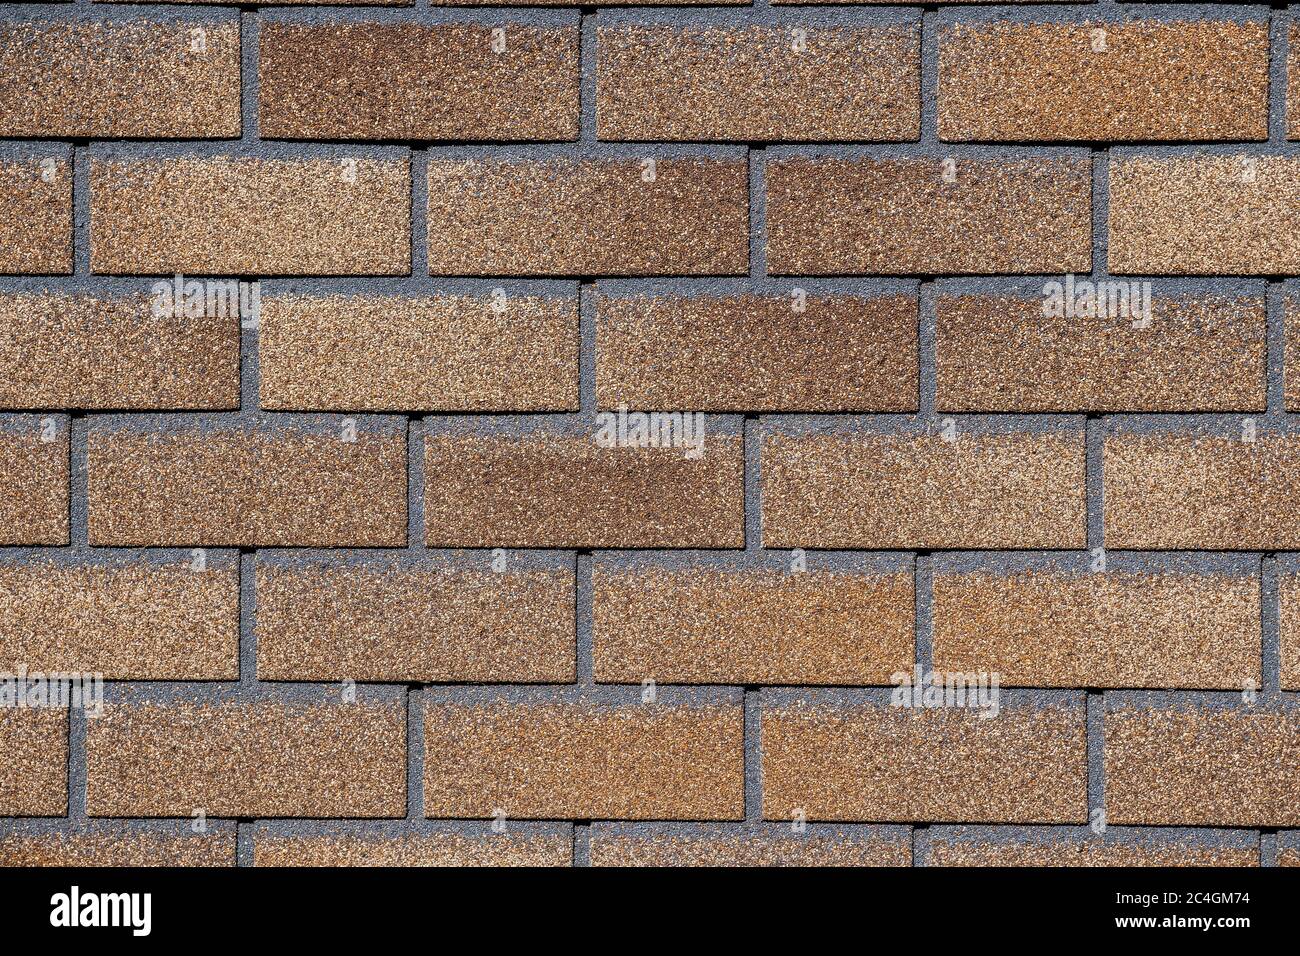 Dark brown and yellow surface of roofing tiles close up. Cover of shape of squares. Dark roof tile, grunge texture. Brick wall background. Stock Photo